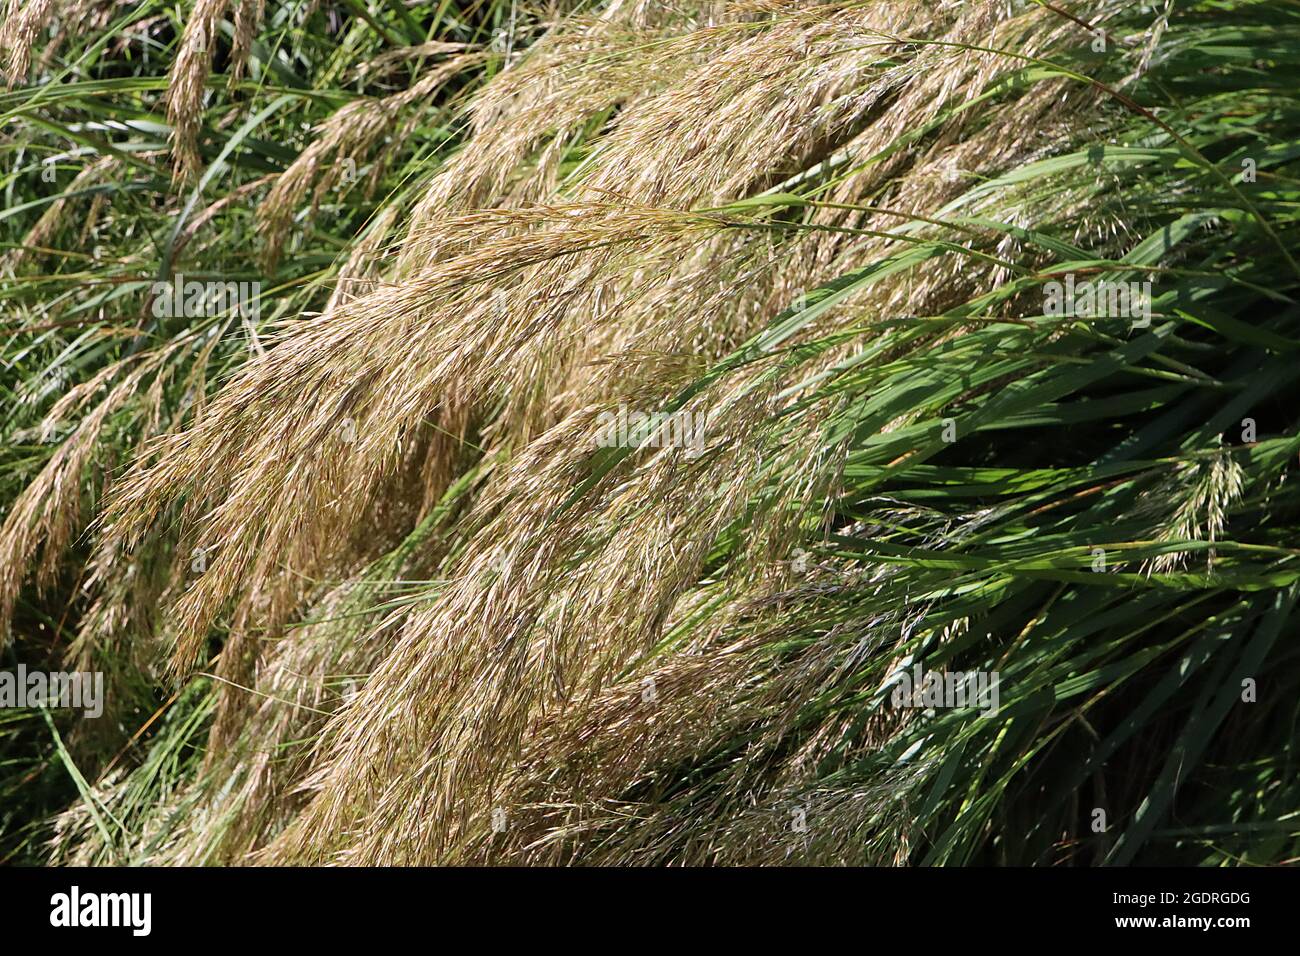 Stipa calamagrostis rough feather grass – long feathery arching plumes of buff panicles and mid green stems,  July, England, UK Stock Photo